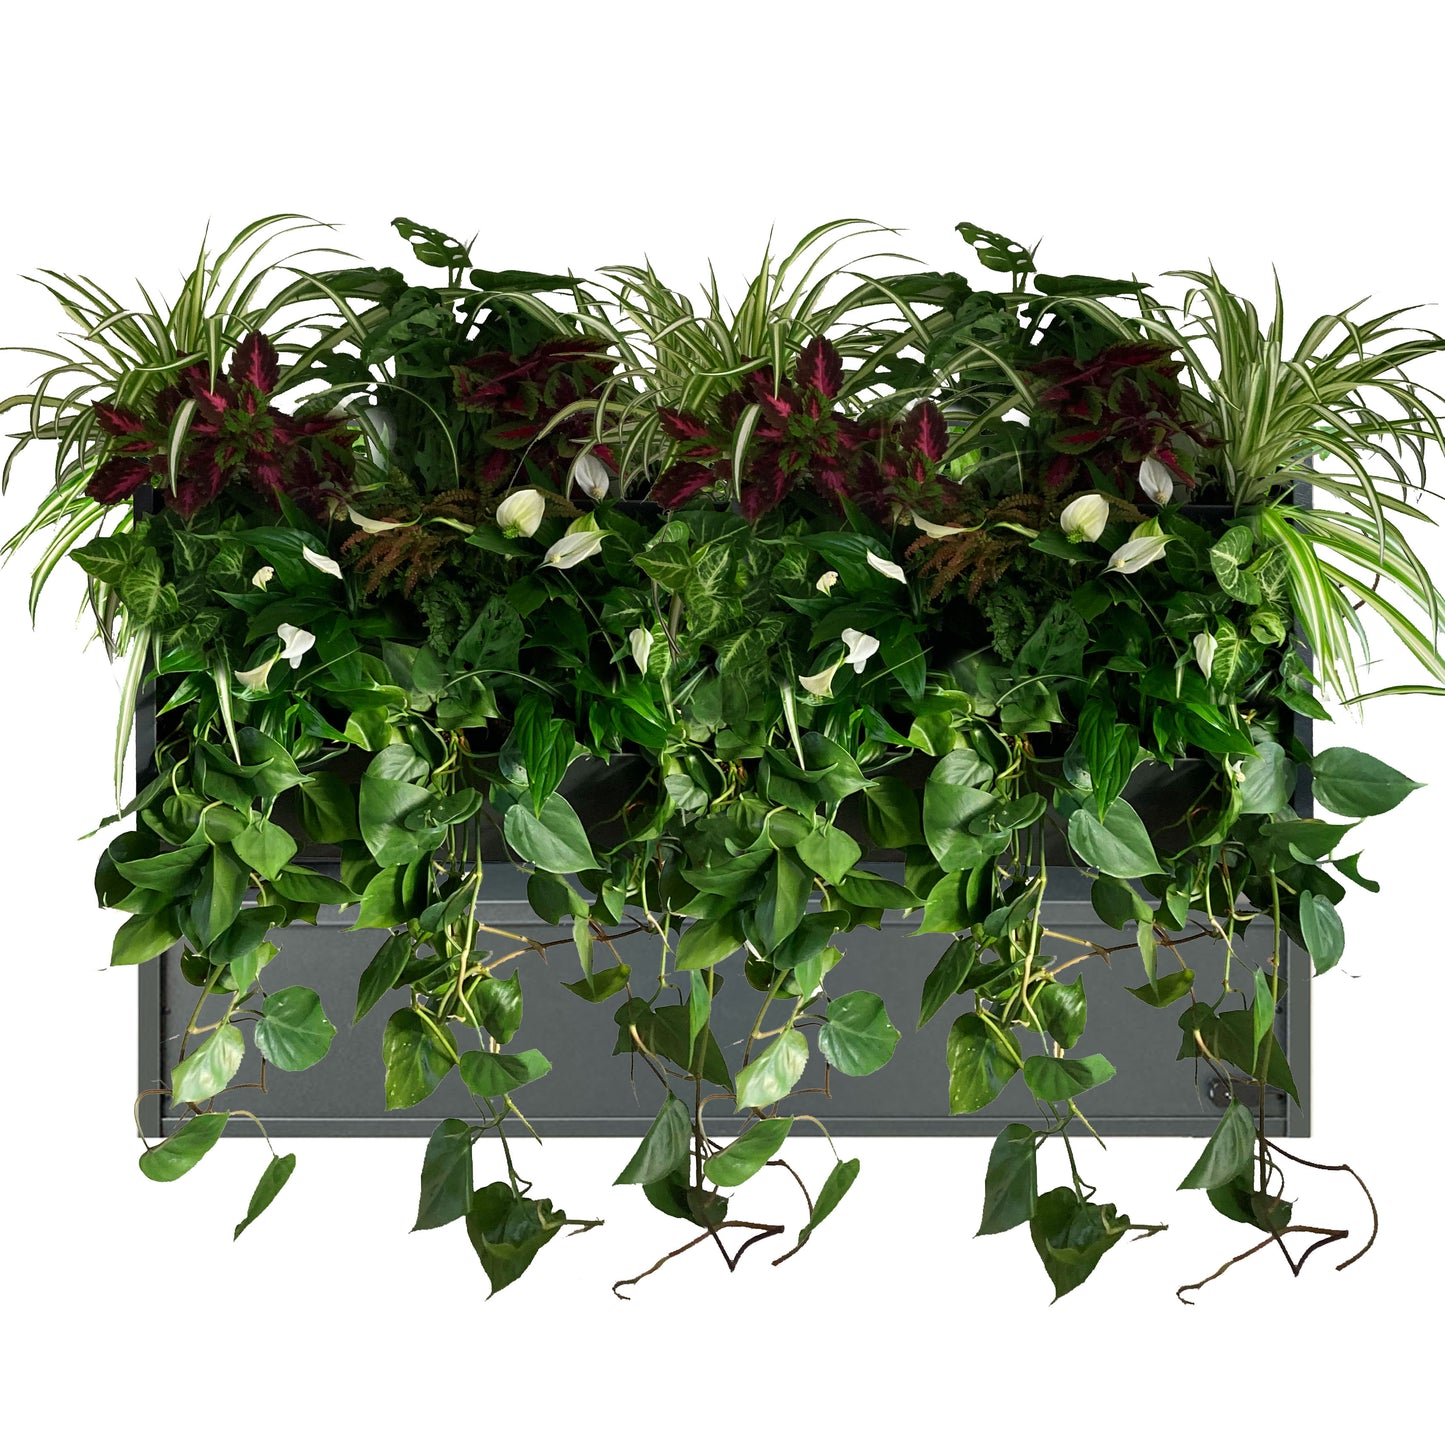 GreenWalls BOTTOM LEVEL semi automatic plug-in self-build living plant wall kit - 60cm 3 tray high planting system with sidewalls